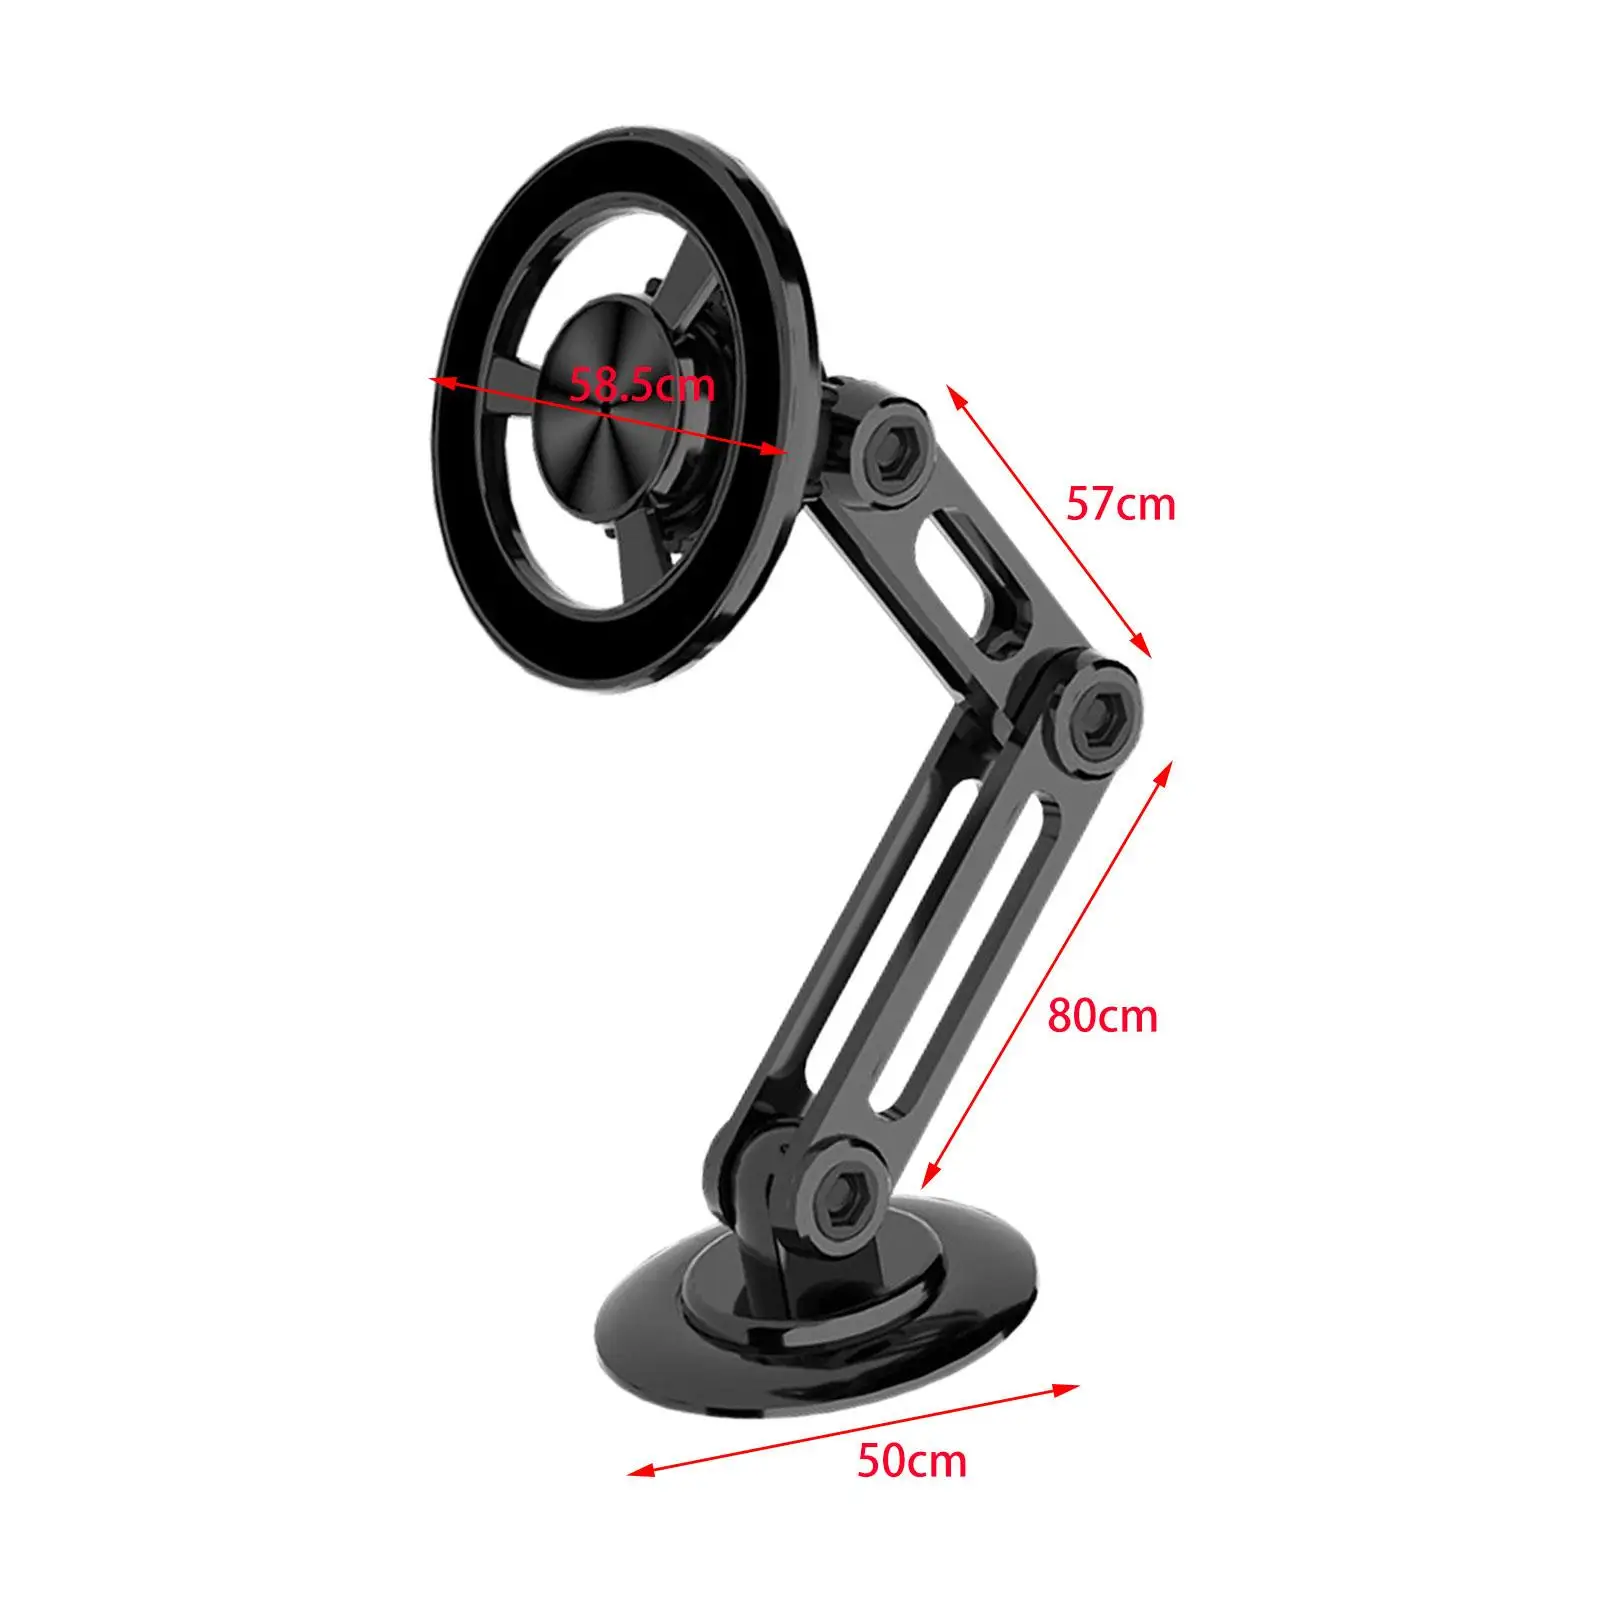 Cell Phone Holder Durable 360 Degree Rotation Compact Adjustable Universal Magnetic Car Mount Car Accessories for Dashboard